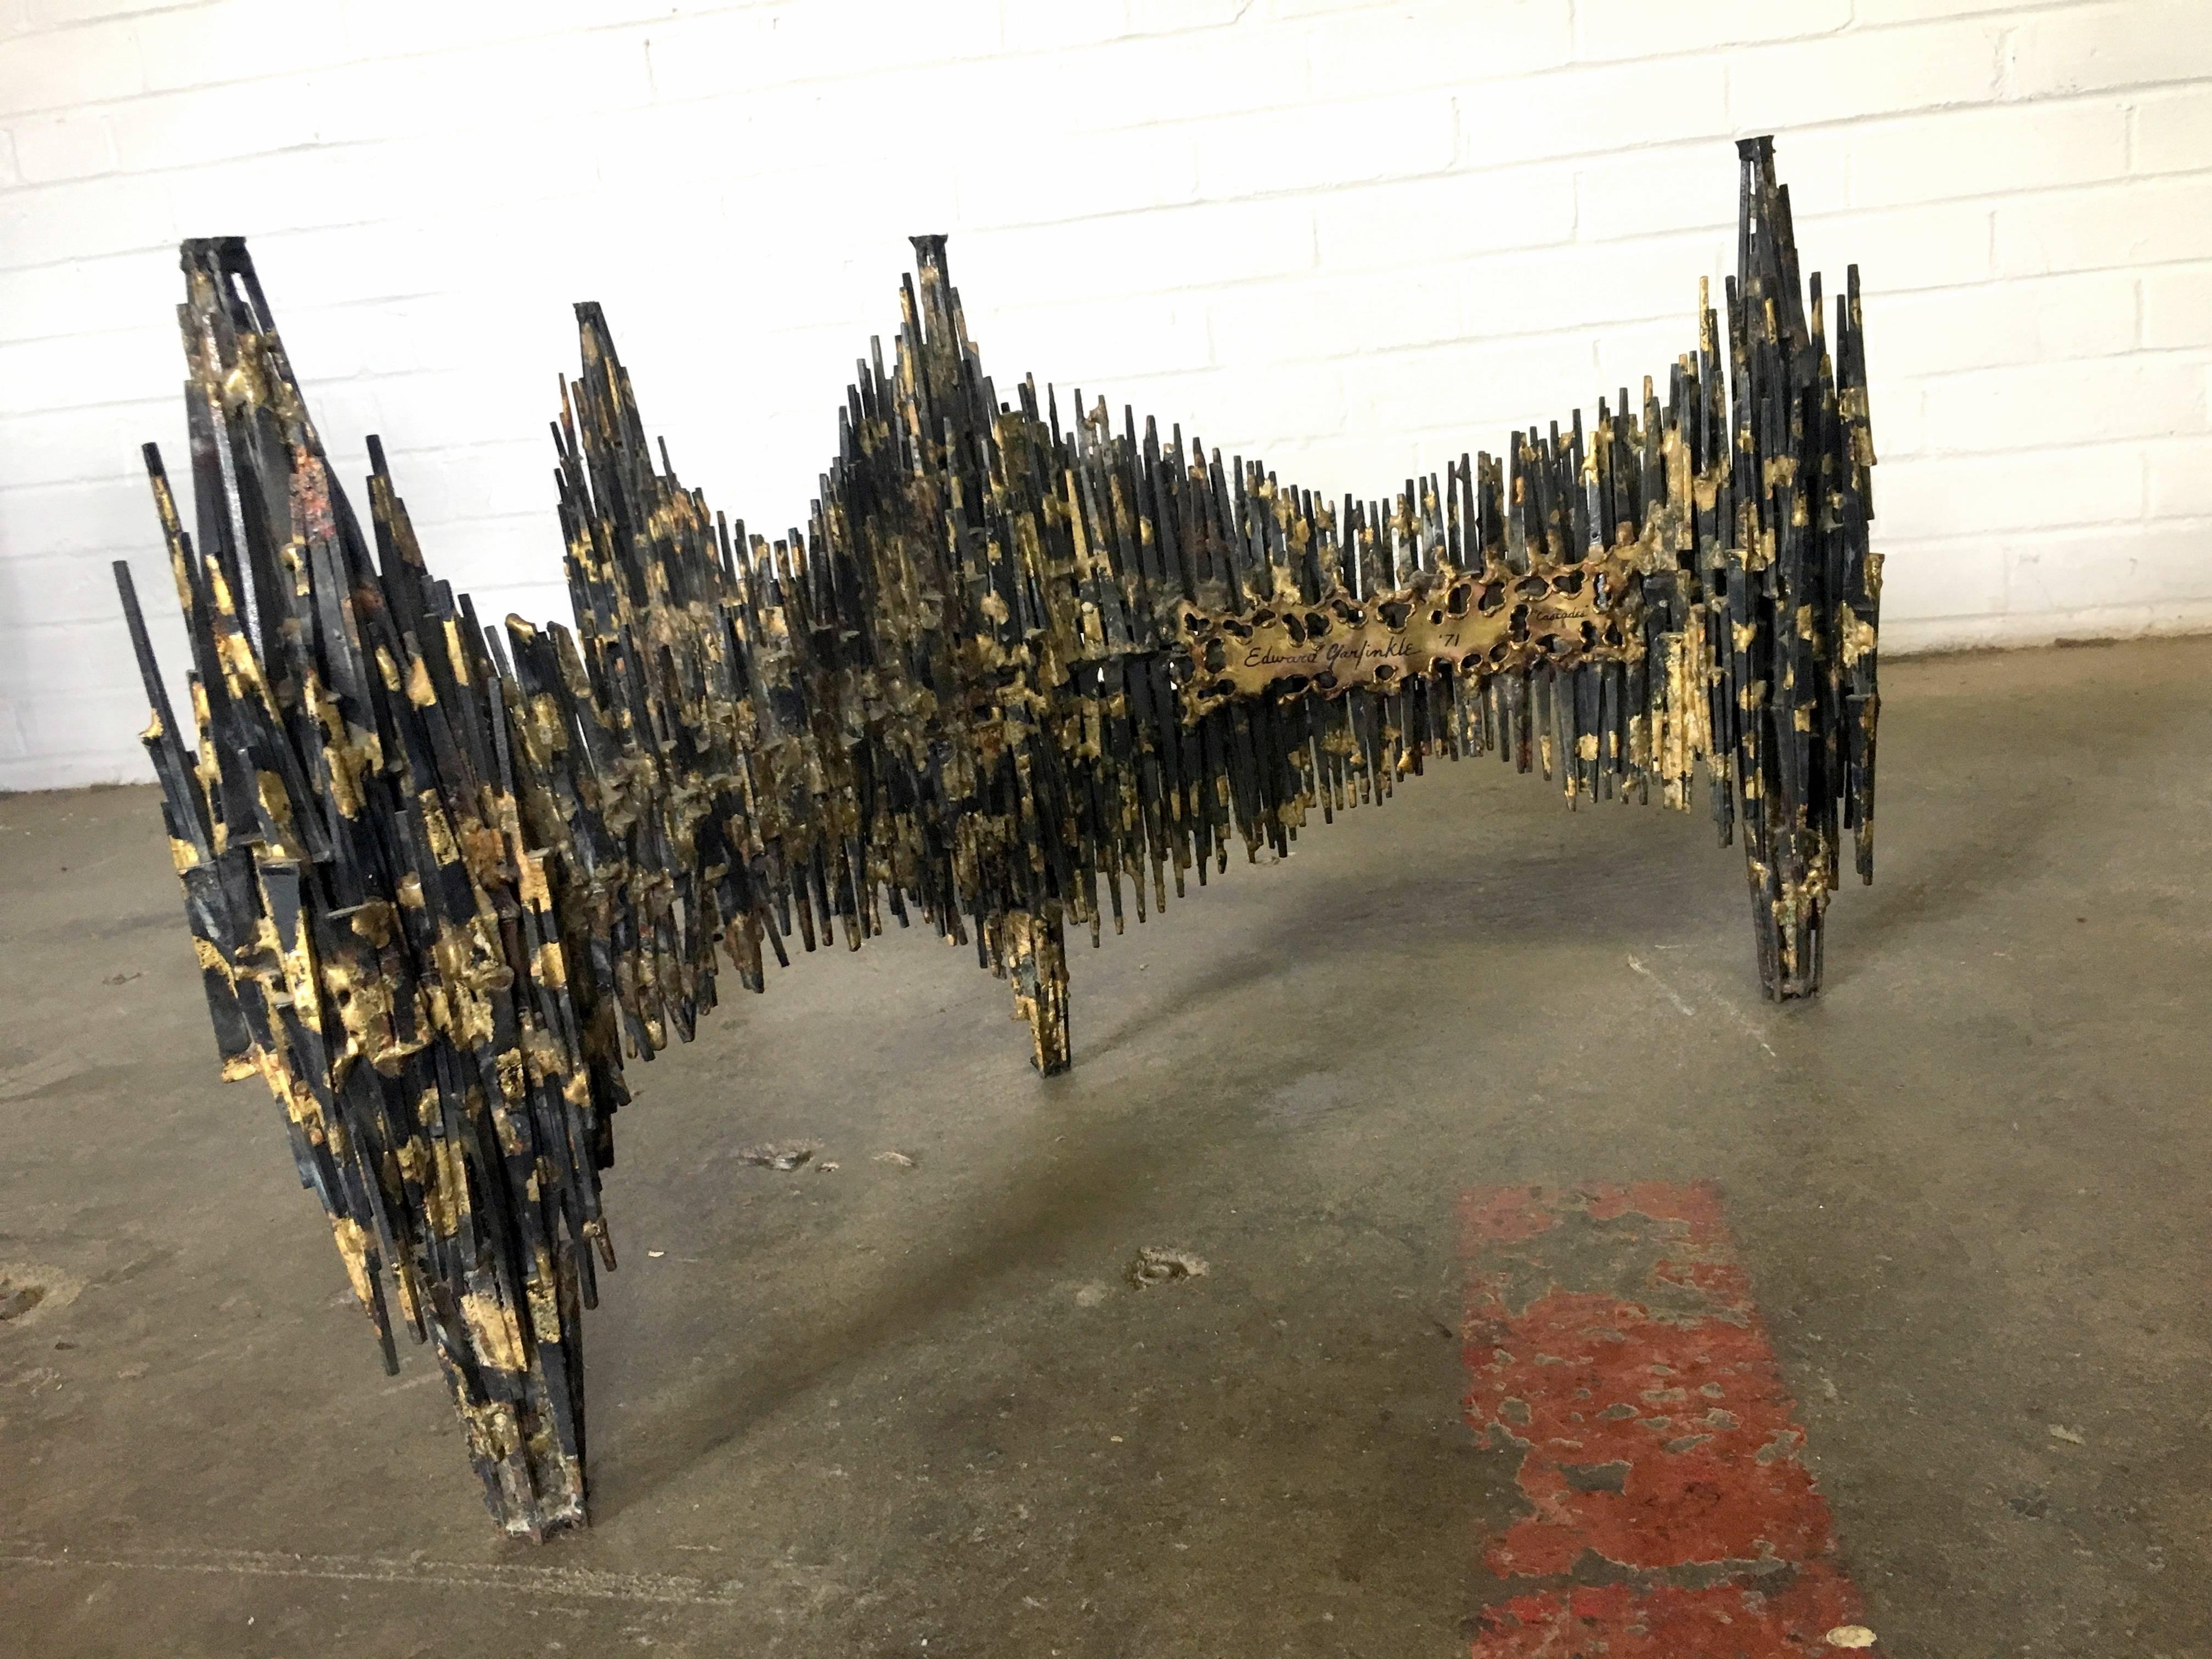 Entitled, "Cascades"
One of a kind, knock your eyes out, gorgeous creation from Designer, Edward Garfinkle.
These steel spikes were welded together and then brass was perfectly applied to get this affect.
Topped all off with the